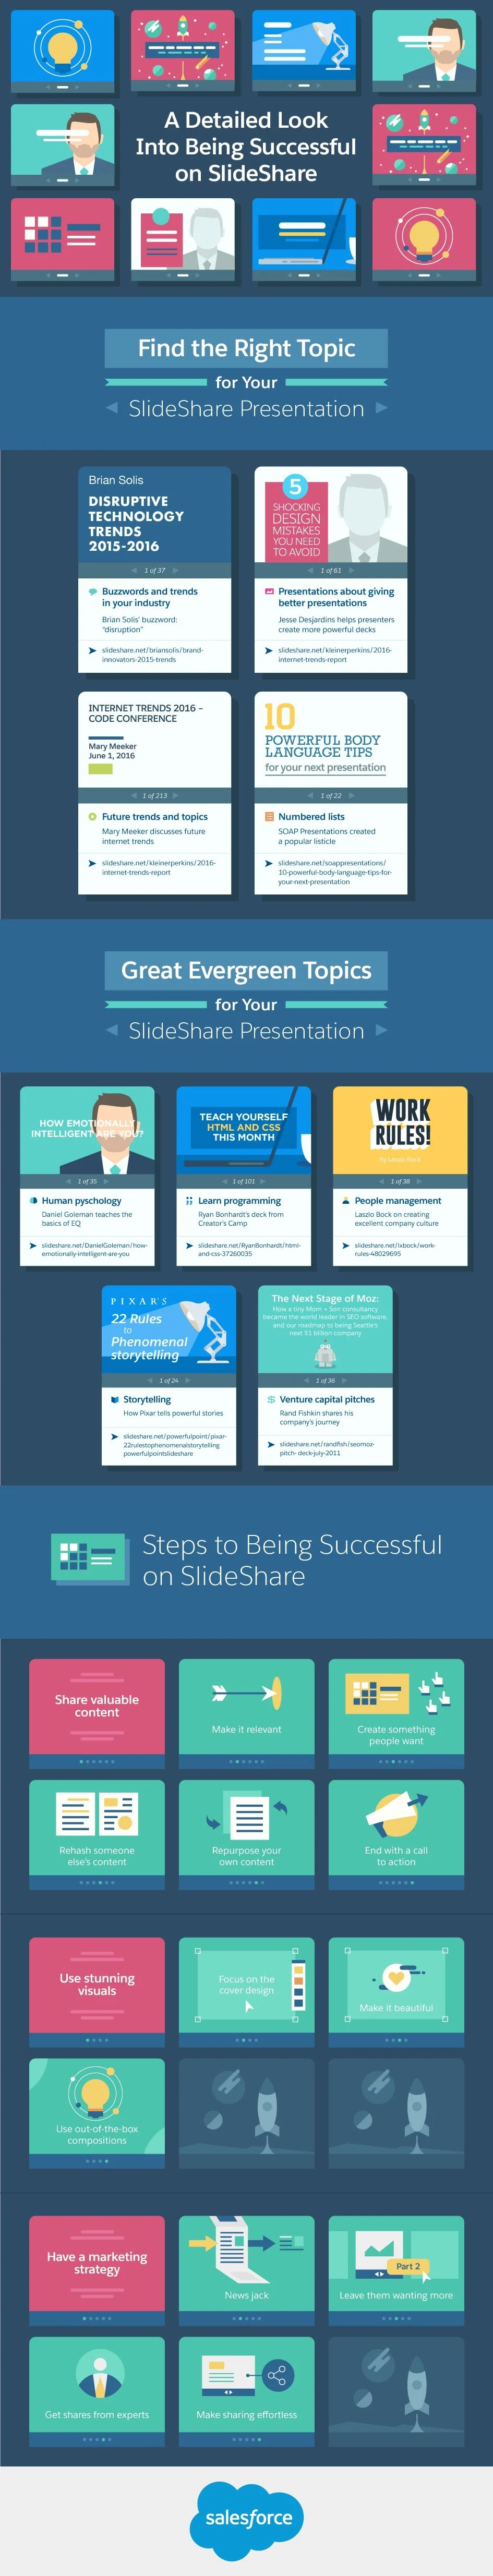 A Detailed Look Into Being Successful on SlideShare - #infographic